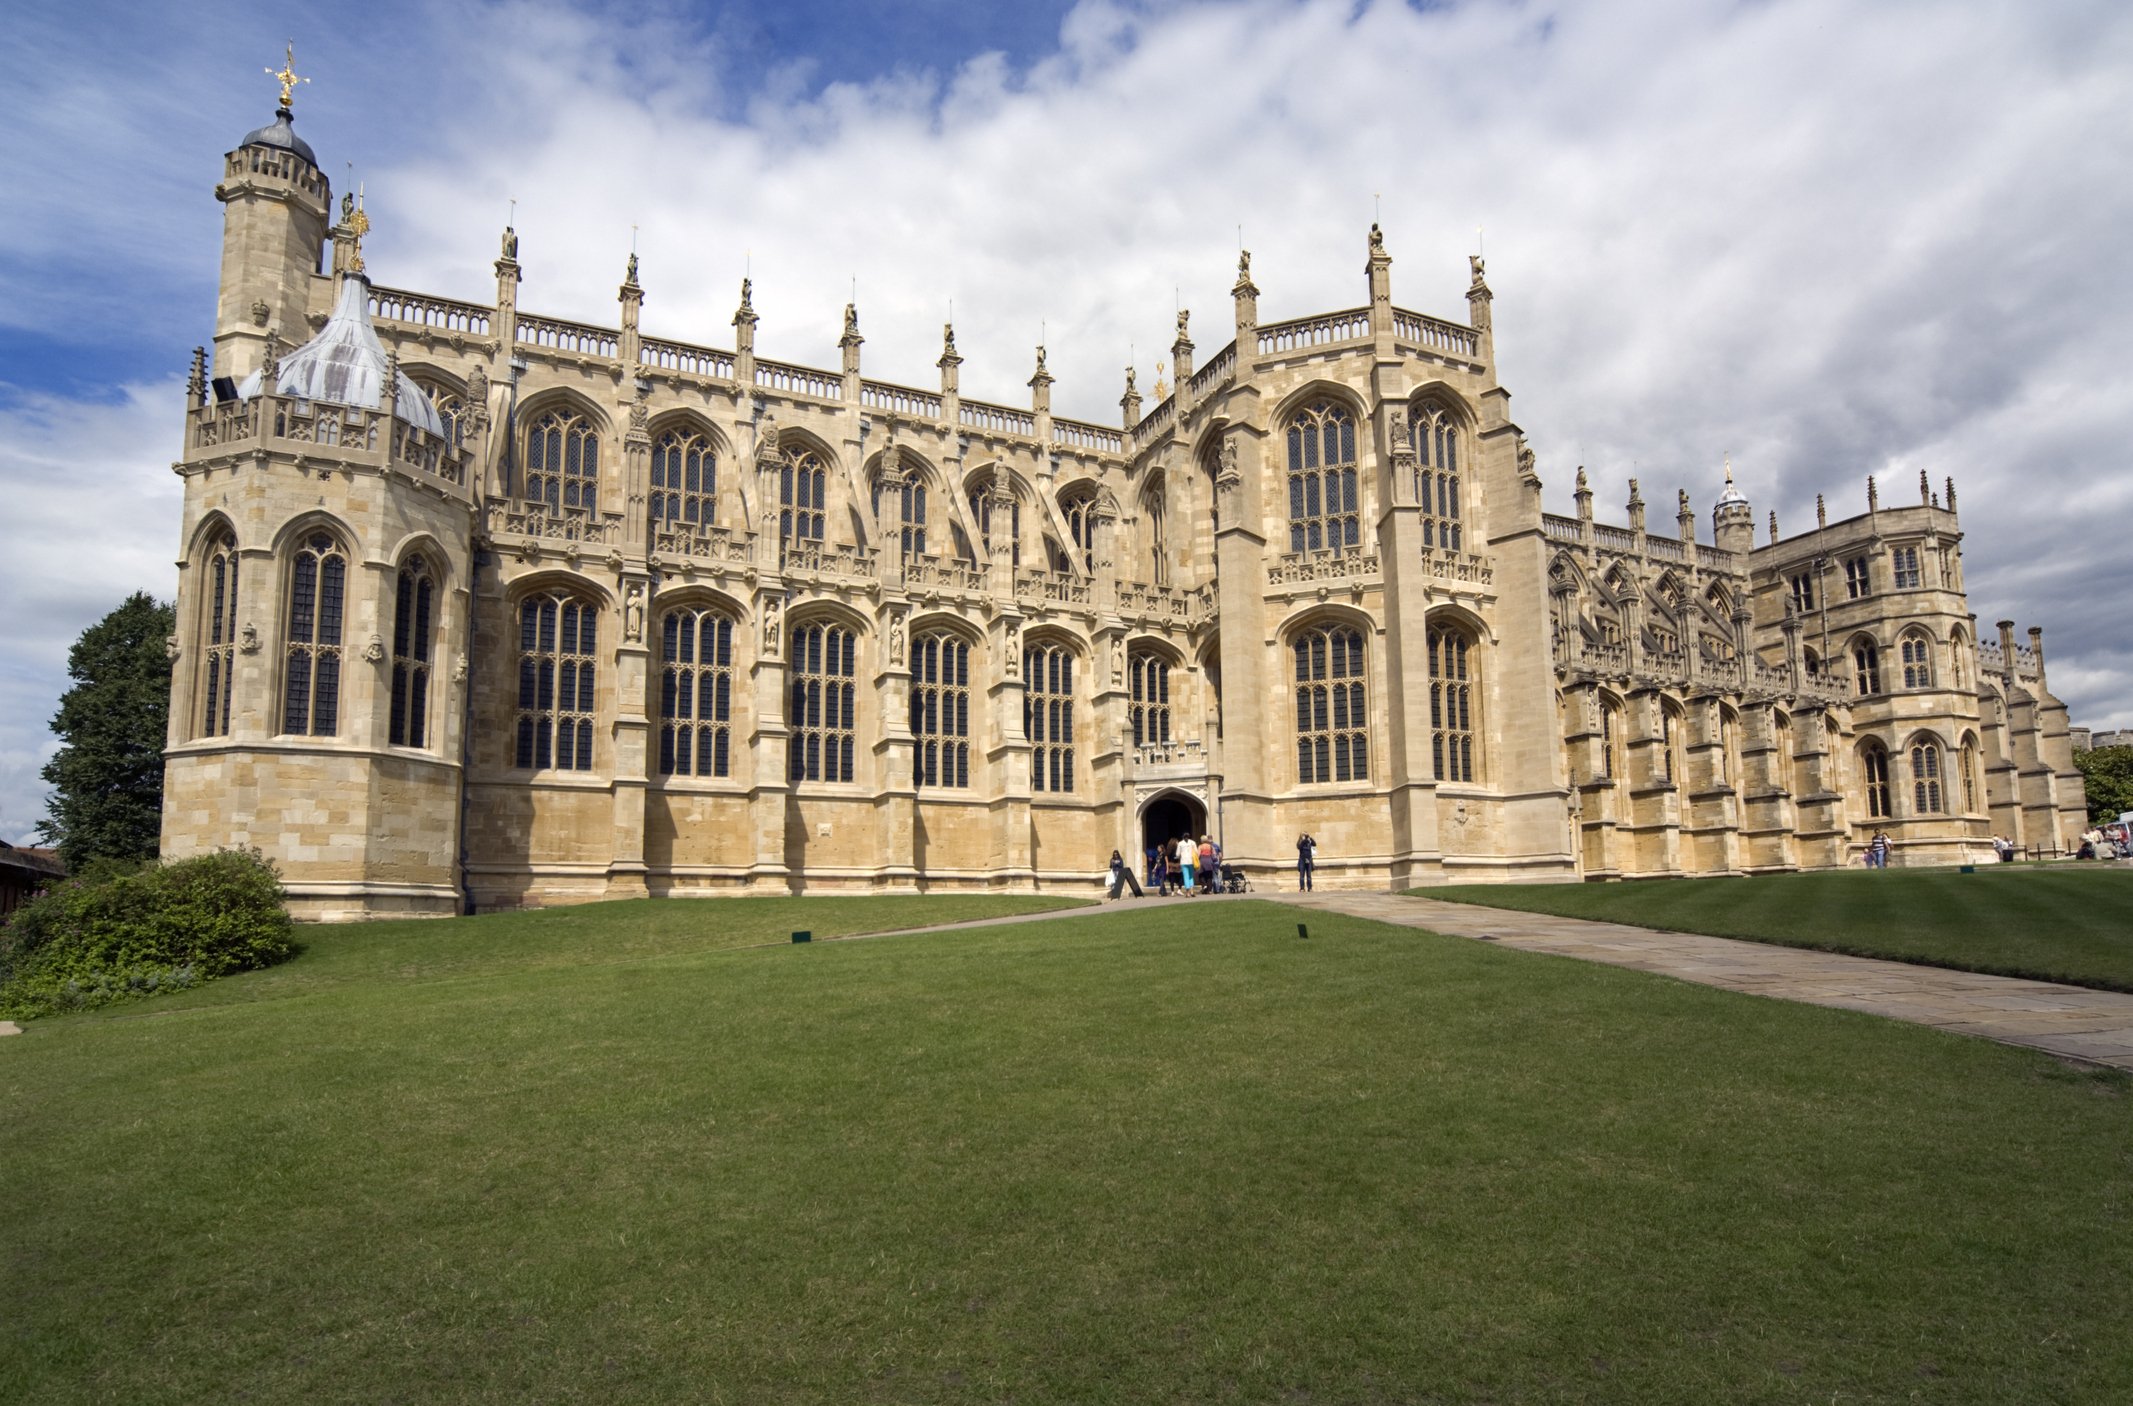 St George's Chapel, Windsor Castle | Source: Getty Images